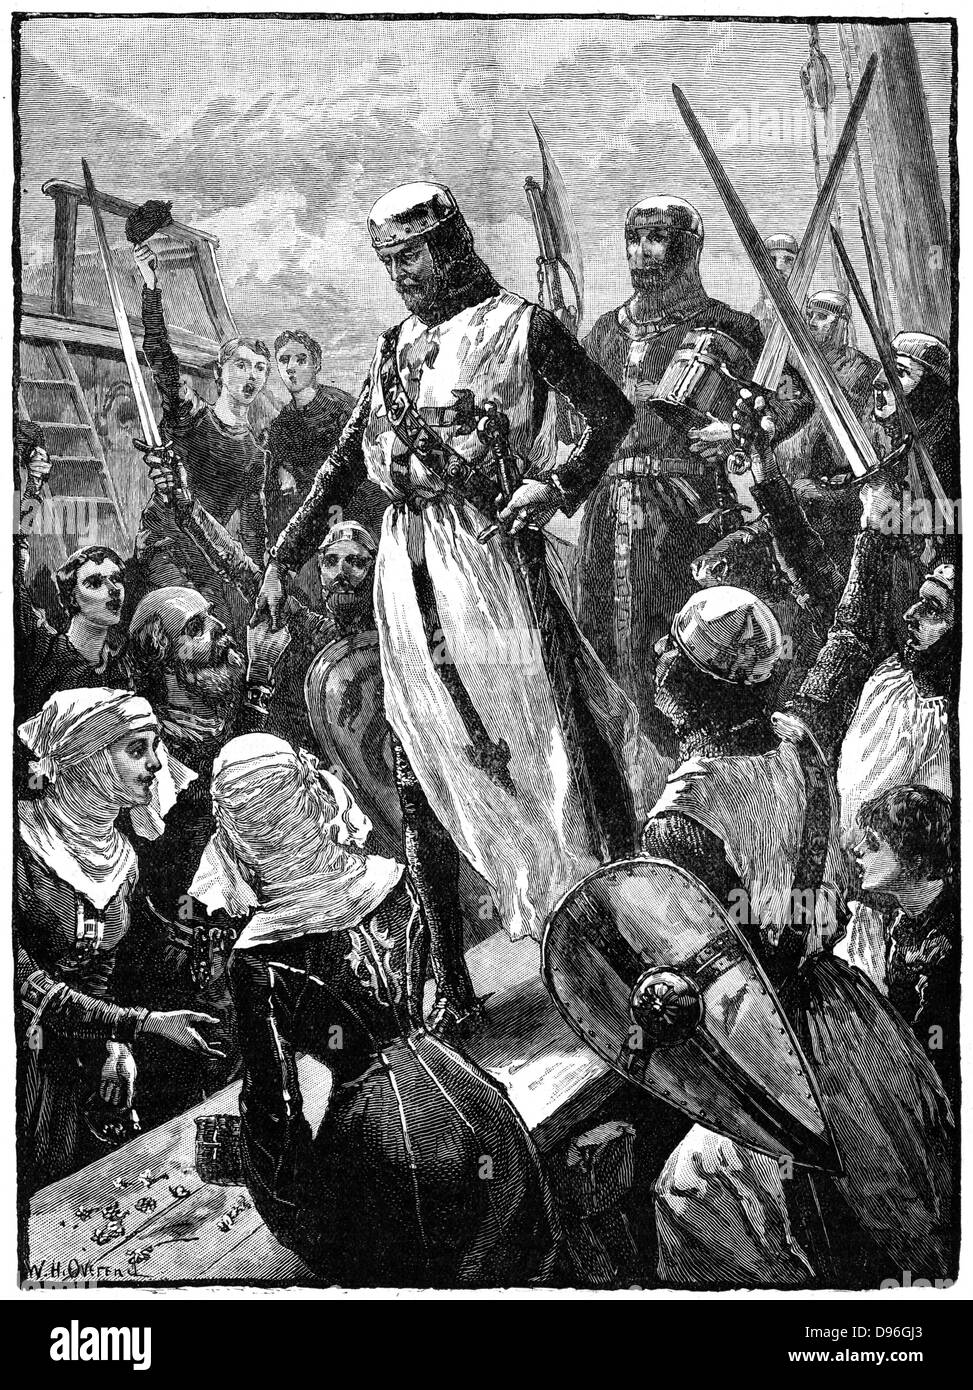 Richard I, Coeur de Lion, (1157-1199) landing at Sandwich, Kent, 14 March 1194.  Richard,  son of Henry II and Eleanor of Aquitaine, and second  Angevin (Plantagenet) king of England, (1189-1199).  On his way home from the Third Crusade (1189-1192) he was shipwrecked and began to make his way across Europe in disguise. He was recognised and held to ransom by Emperor Henry VI.  England paid the ransom and Richard was released.   Wood engraving c1880. Stock Photo